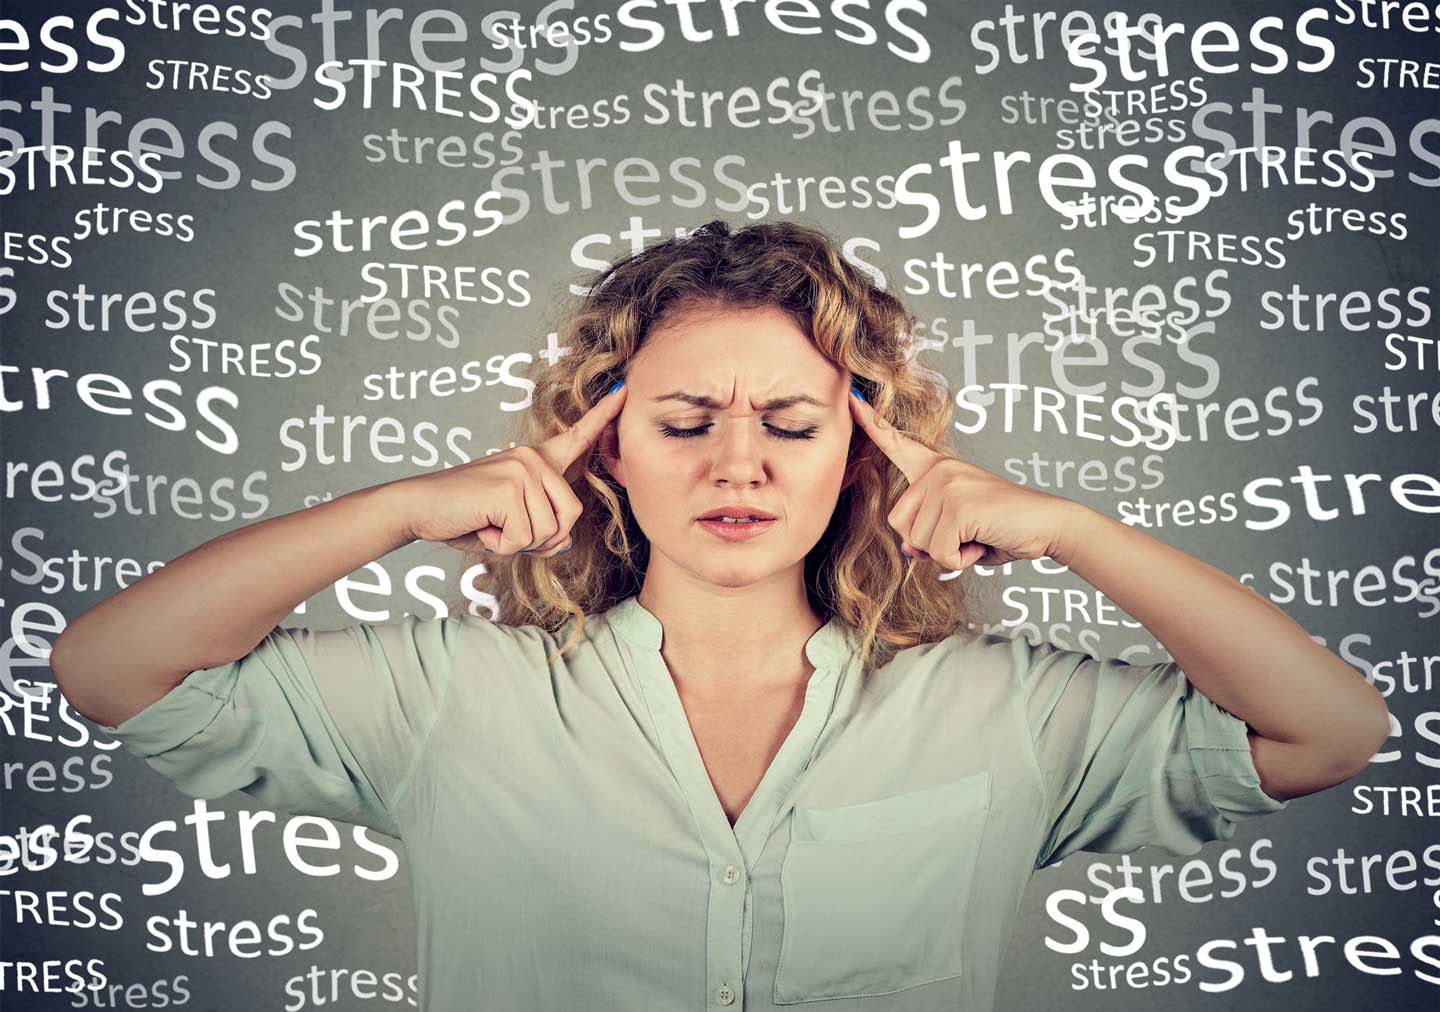 Always Stressed? Consider these Nutrients & Herbs to Cope